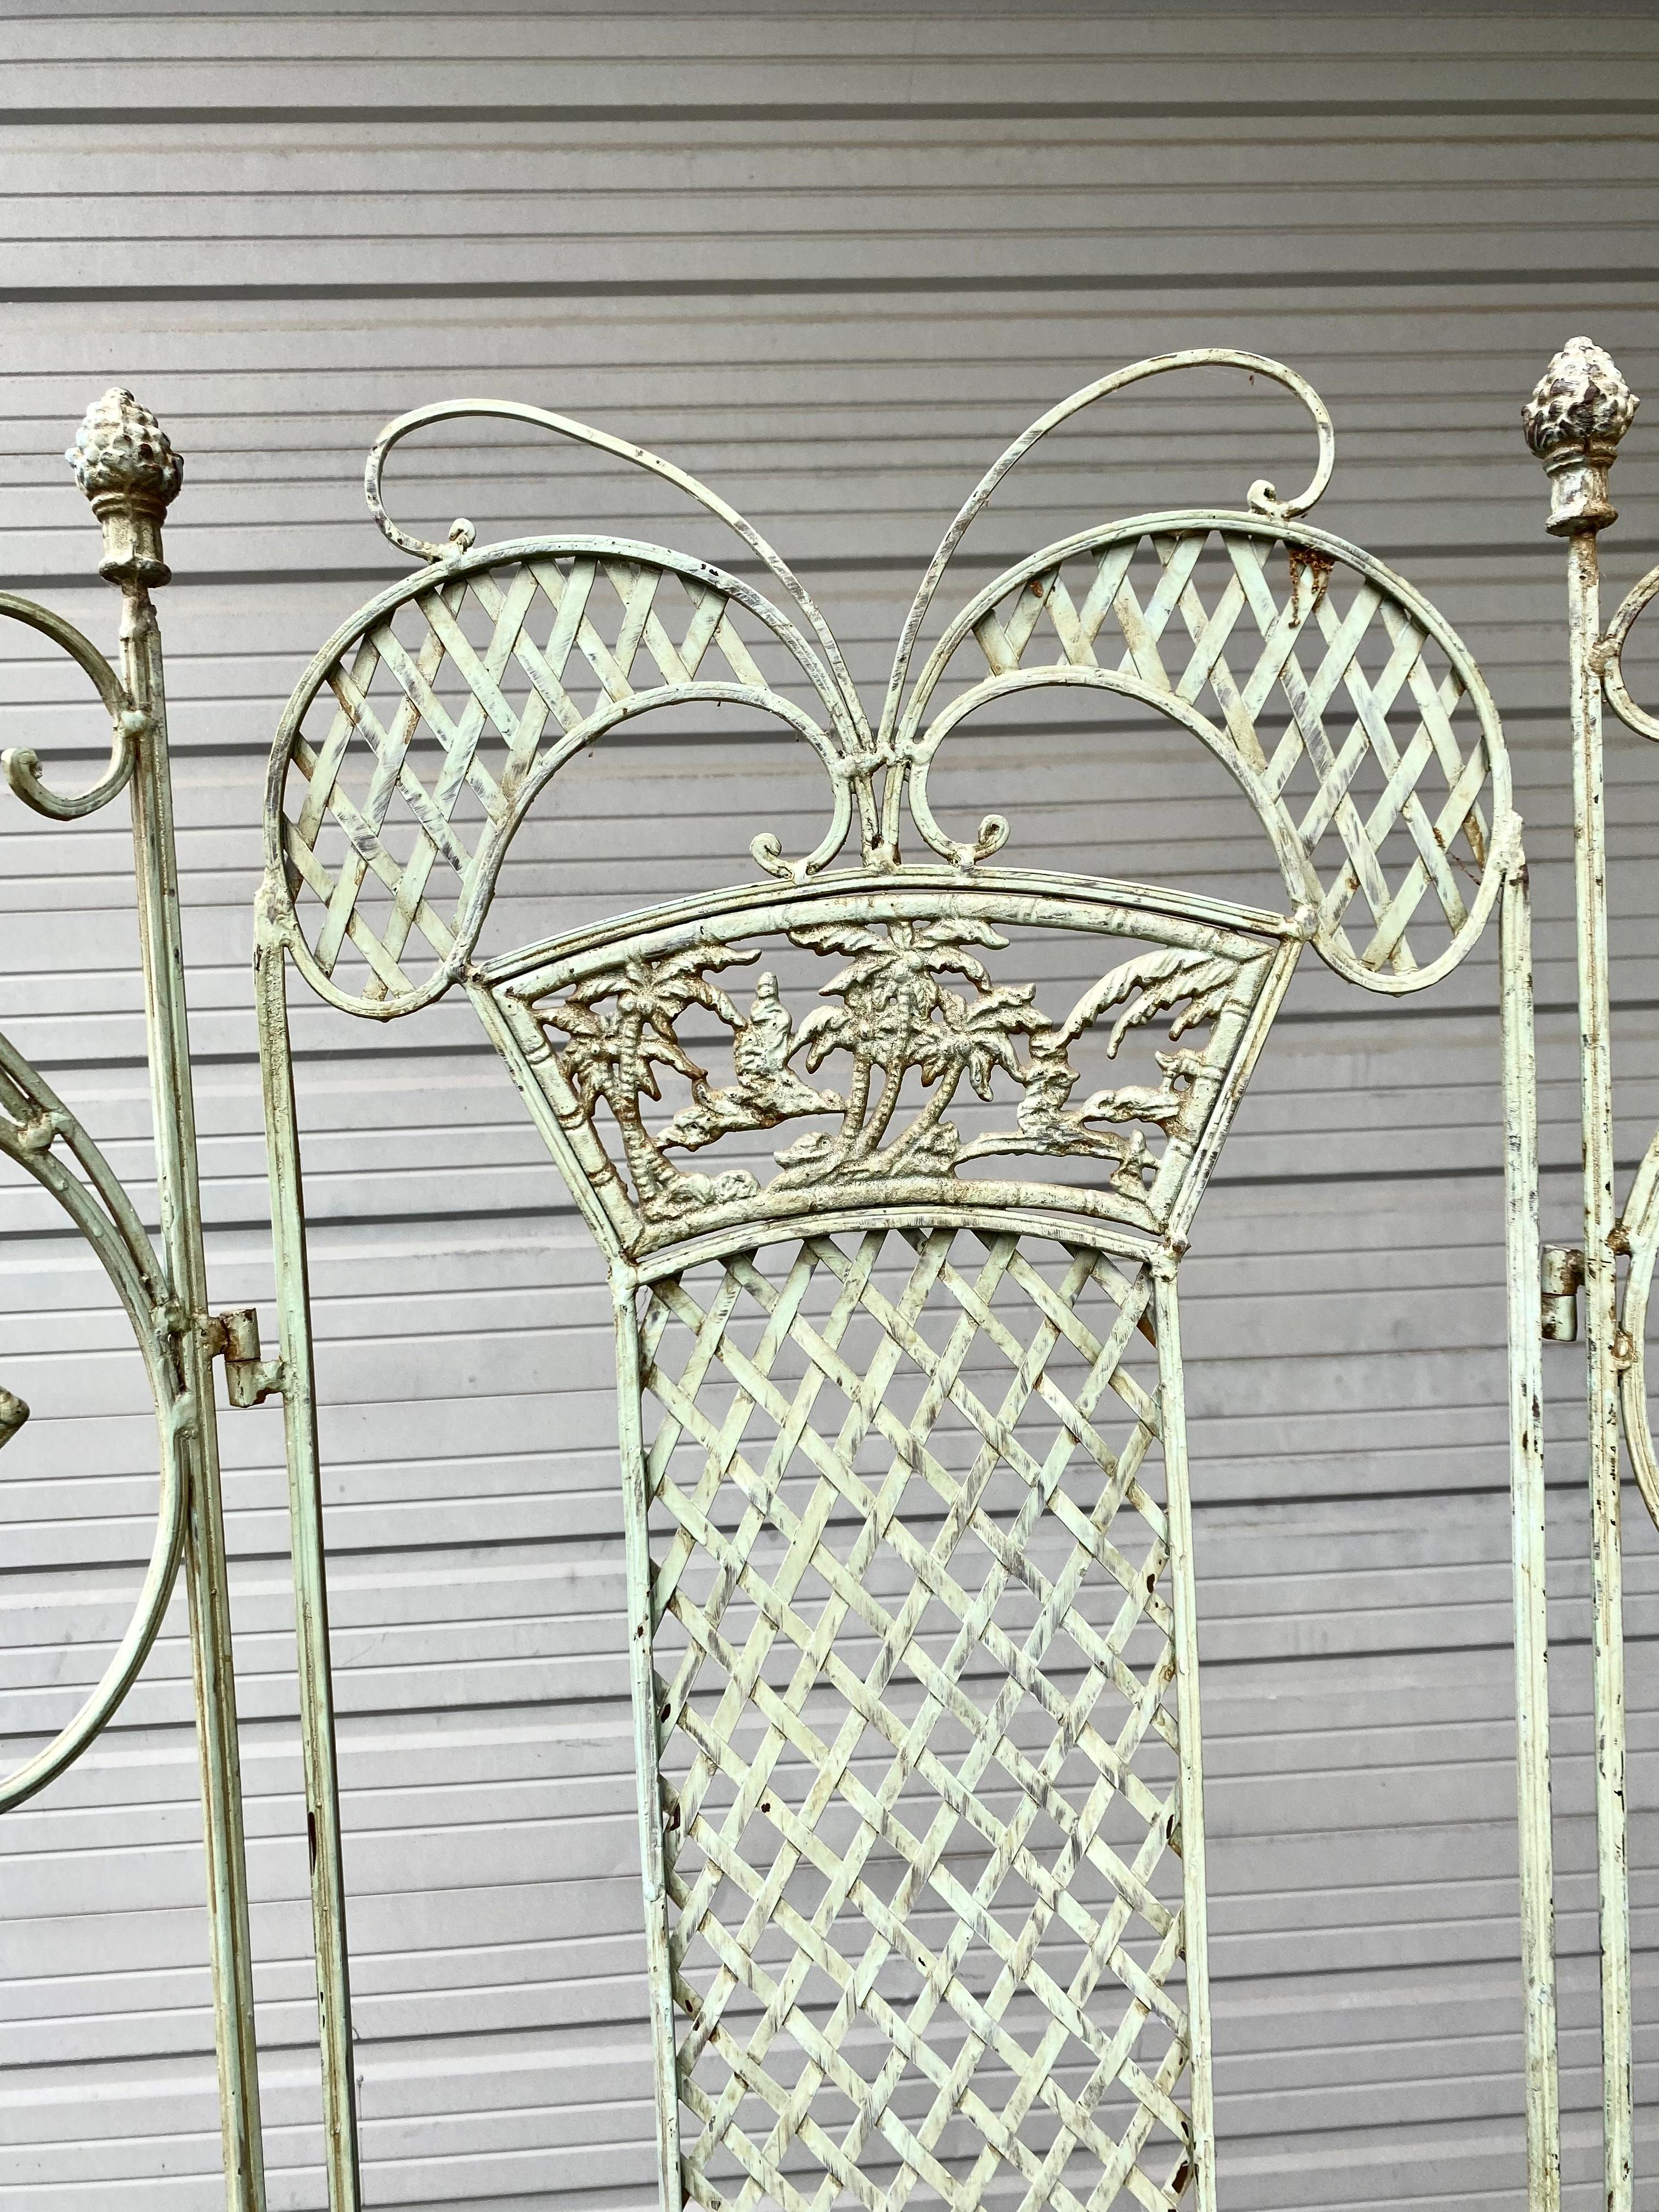 Unusual Art Nouveau Style 3 Panel Decorative Wrought Iron Screen/Divider In Excellent Condition For Sale In Buffalo, NY